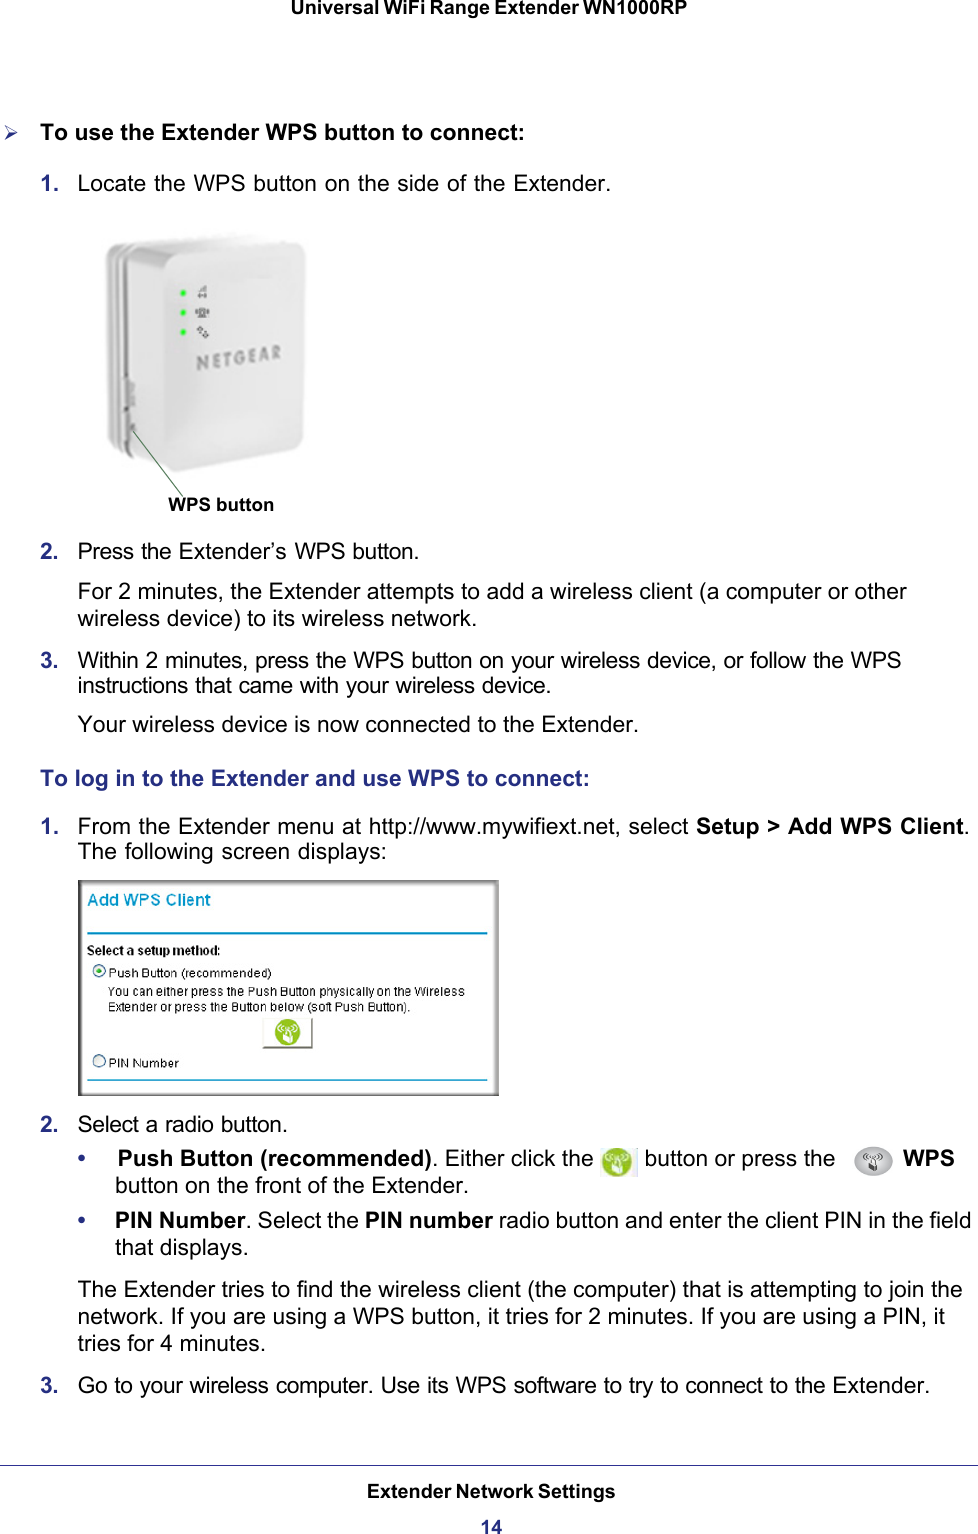 Extender Network Settings14Universal WiFi Range Extender WN1000RP To use the Extender WPS button to connect:1.  Locate the WPS button on the side of the Extender. WPS button2.  Press the Extender’s WPS button.For 2 minutes, the Extender attempts to add a wireless client (a computer or other wireless device) to its wireless network.3.  Within 2 minutes, press the WPS button on your wireless device, or follow the WPS instructions that came with your wireless device.Your wireless device is now connected to the Extender.To log in to the Extender and use WPS to connect:1.  From the Extender menu at http://www.mywifiext.net, select Setup &gt; Add WPS Client. The following screen displays:2.  Select a radio button.•     Push Button (recommended). Either click the   button or press the   WPS button on the front of the Extender.•     PIN Number. Select the PIN number radio button and enter the client PIN in the field that displays.The Extender tries to find the wireless client (the computer) that is attempting to join the network. If you are using a WPS button, it tries for 2 minutes. If you are using a PIN, it tries for 4 minutes.3.  Go to your wireless computer. Use its WPS software to try to connect to the Extender.